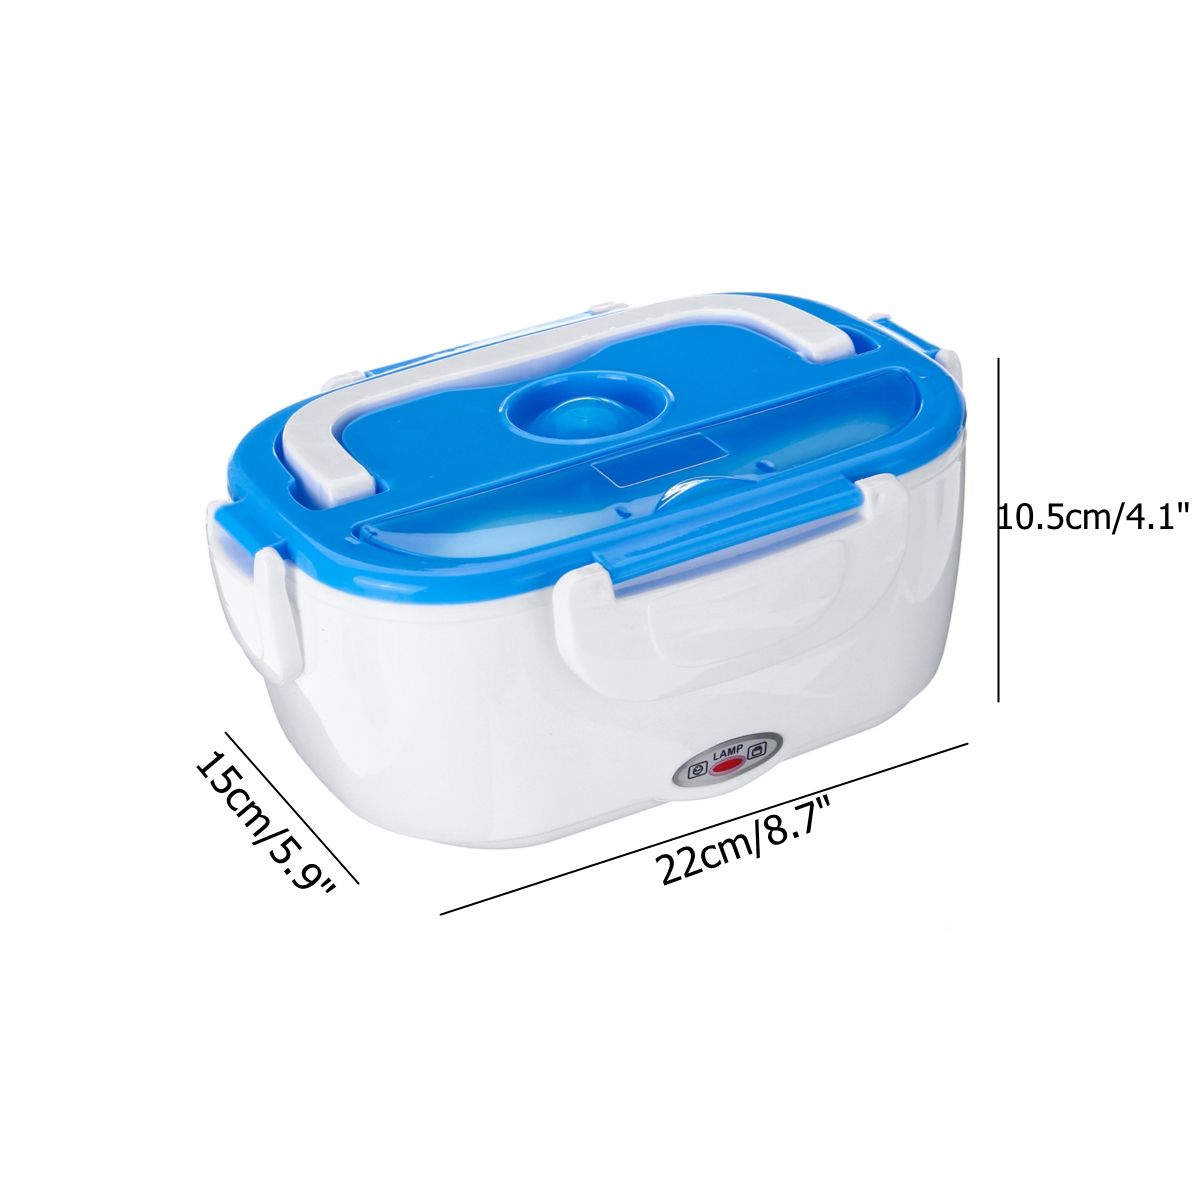 Portable-12V-105L-Heated-Electric-Lunch-Box-Food-Warmer-Container-Car-Adapter-1570165